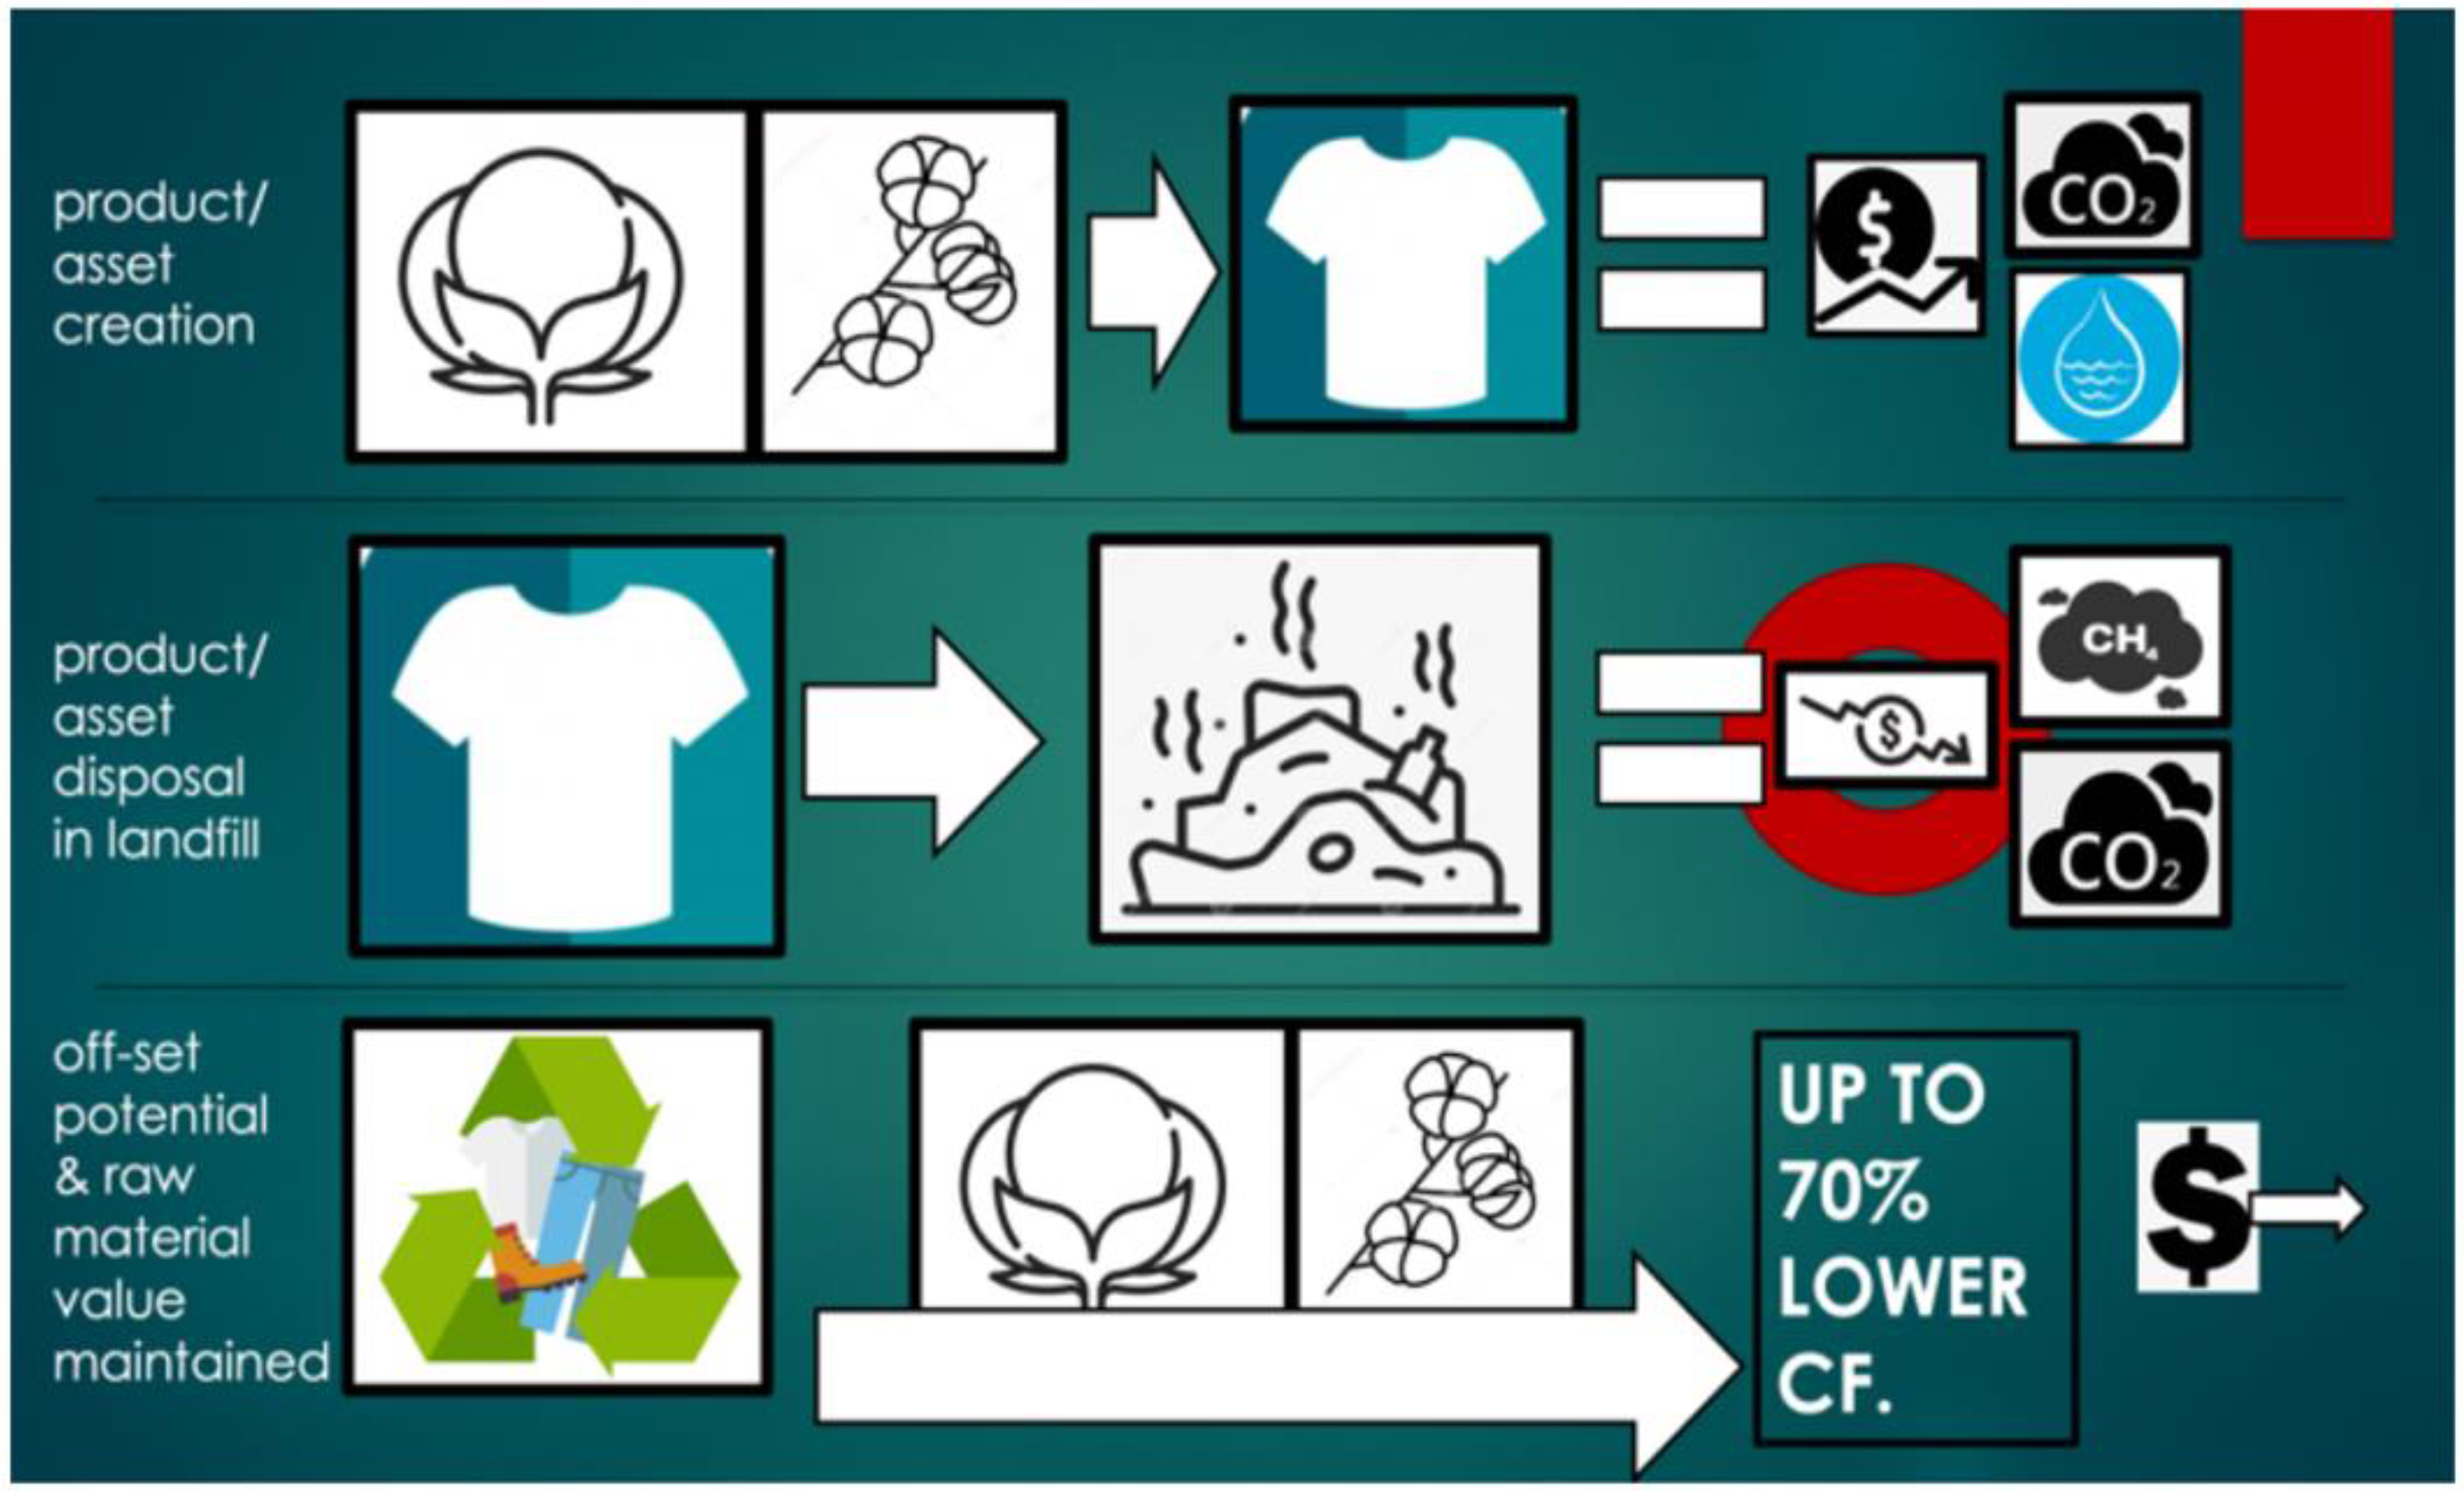 Textile EPR: Recycling laws for fashion e-commerce across Europe